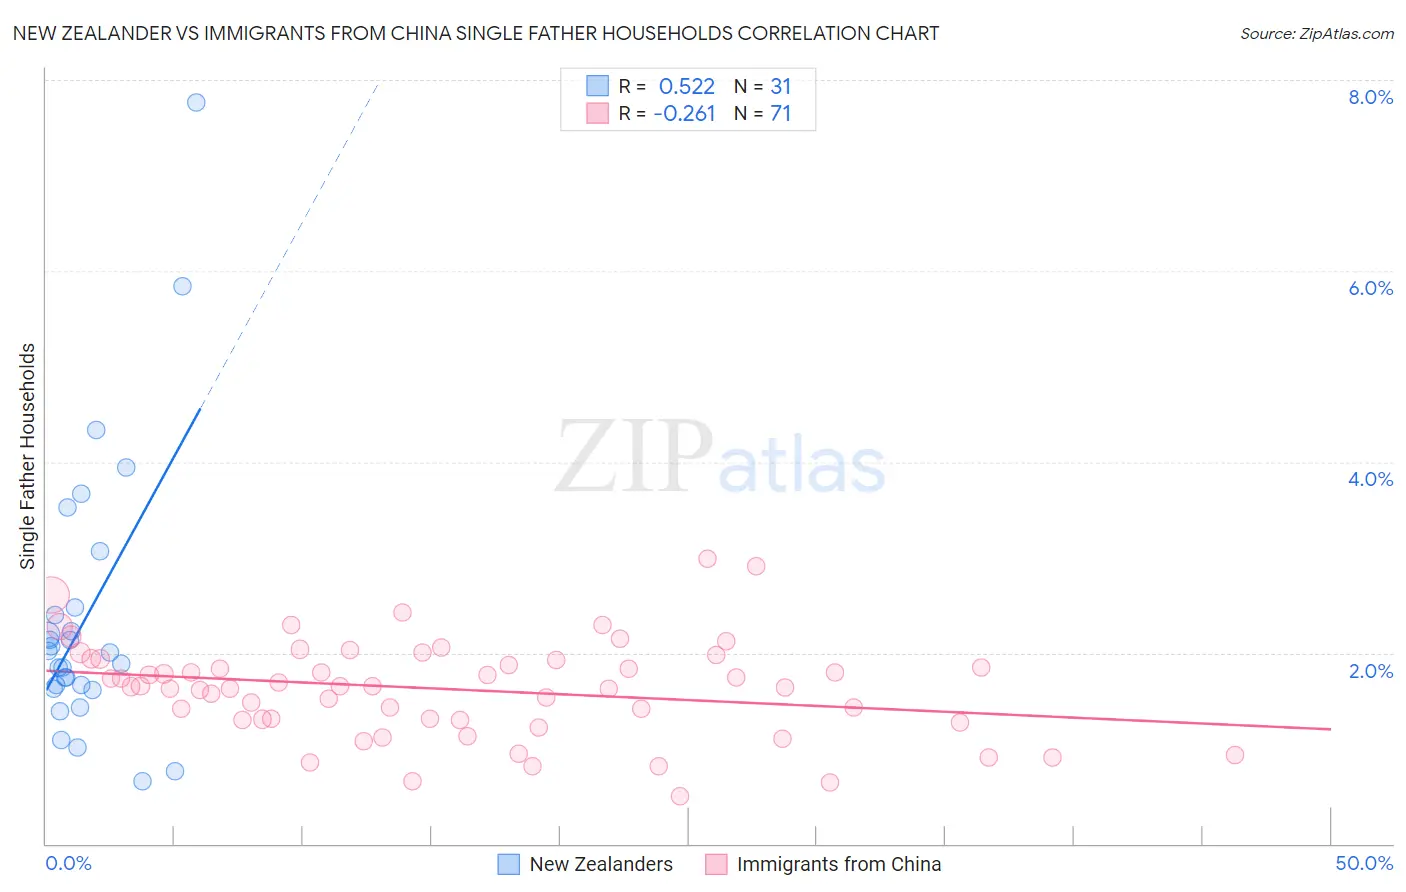 New Zealander vs Immigrants from China Single Father Households